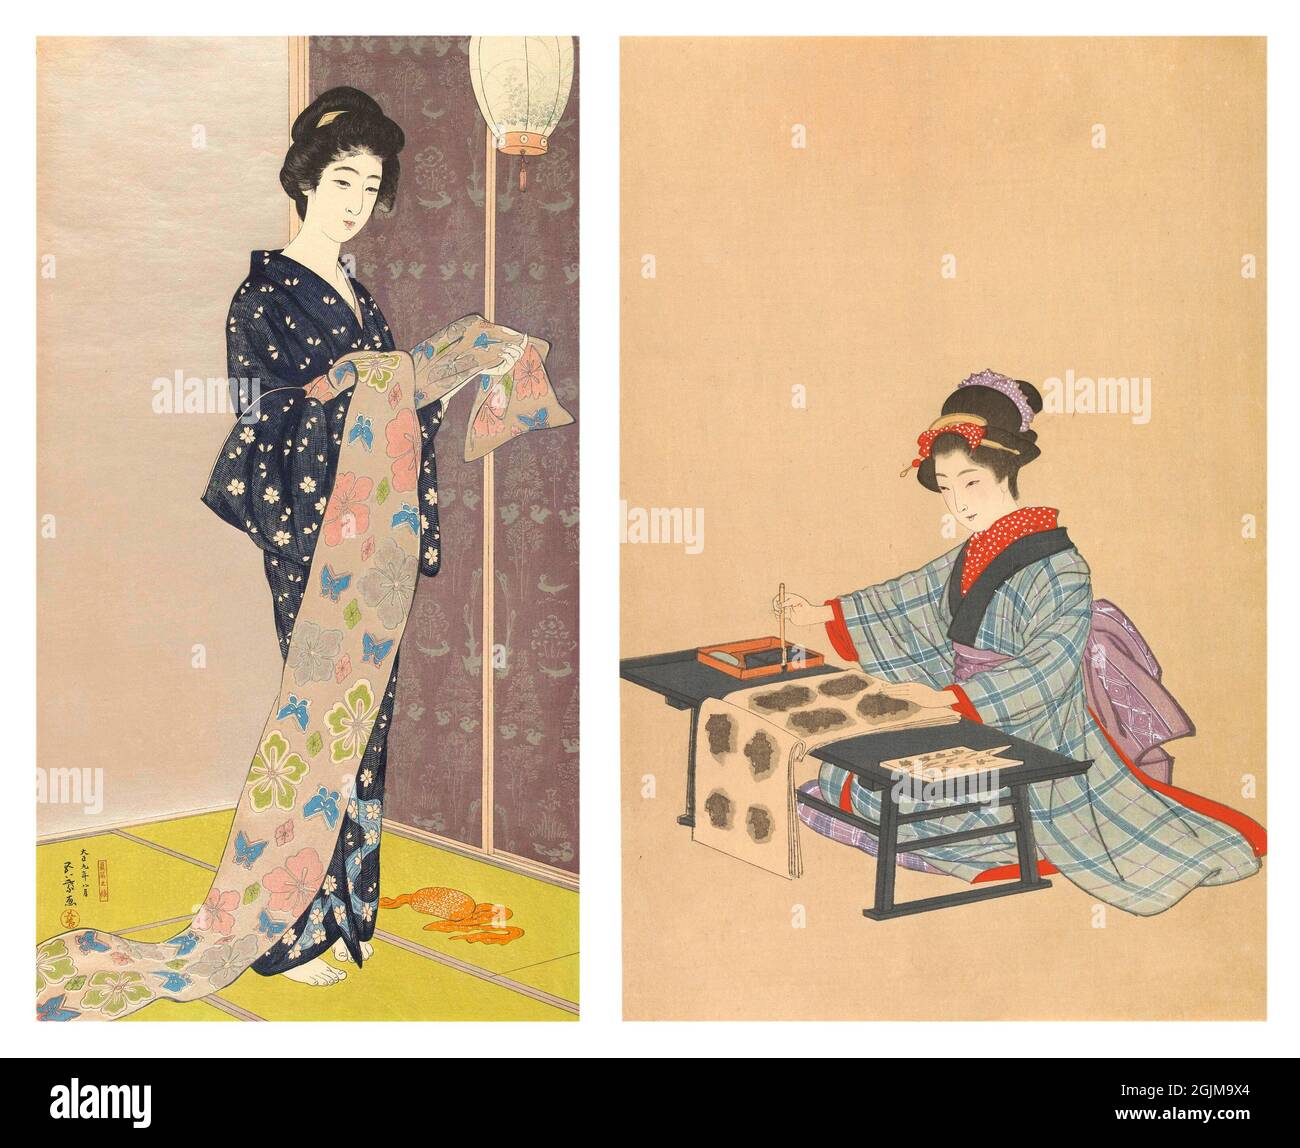 Selection of 2 Japanese painted woodcuts From Left to right: 1.Young woman in summer kimono, standing, holding a long piece of silver fabric decorated with flower and butterfly motifs. On the floor of green tatami mats, an orange obi. Purple sliding doors, decorated with flower and bird motifs (1920-30) 2. Japanese Woman execuing calligraphy (19th century)  Unique optimised and enhanced arrangement of two  Japanese woodcut illustrations. Stock Photo